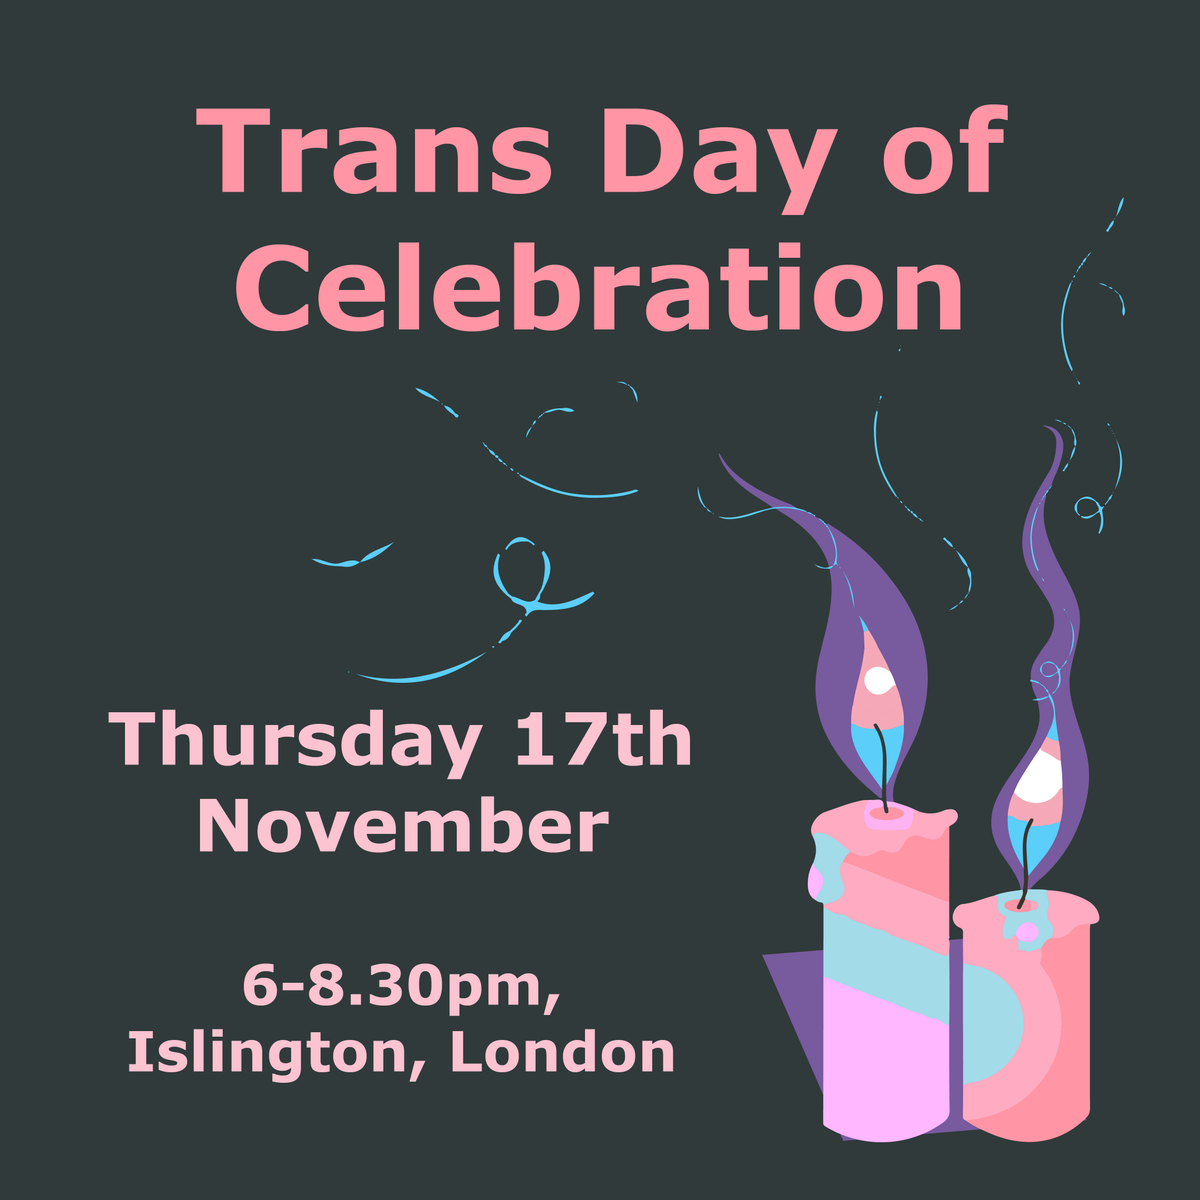 GI is hosting a free Trans Day of Remembrance event on Nov 17th to celebrate and honour trans people we have lost. All trans and non-binary youth between 16-25 are welcome. The space will be supported by experienced trans youth workers. Sign-ups here: ow.ly/TYwl50KION4